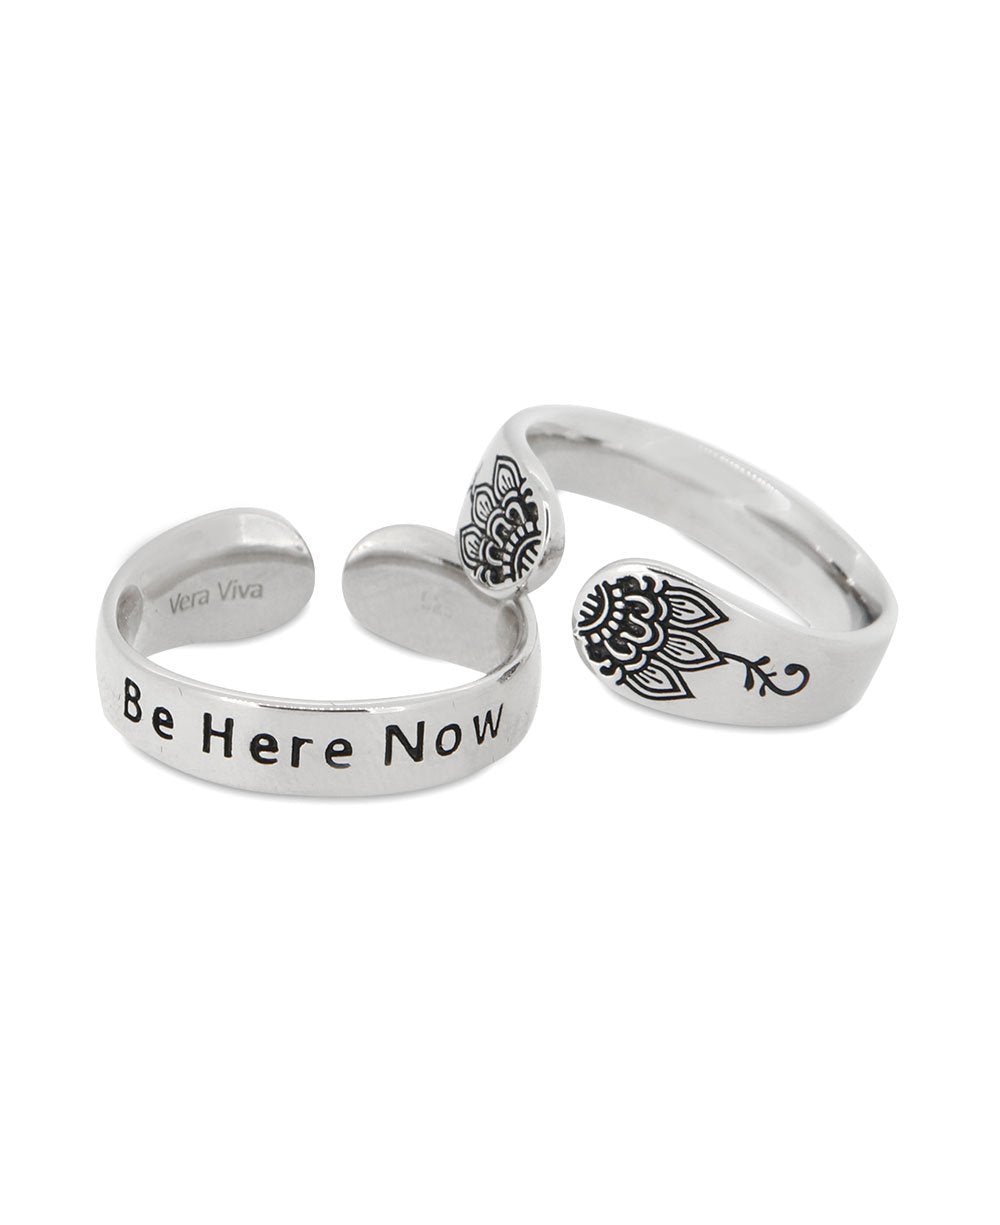 Be Here Now Adjustable Inspirational Sterling Silver Ring - Rings